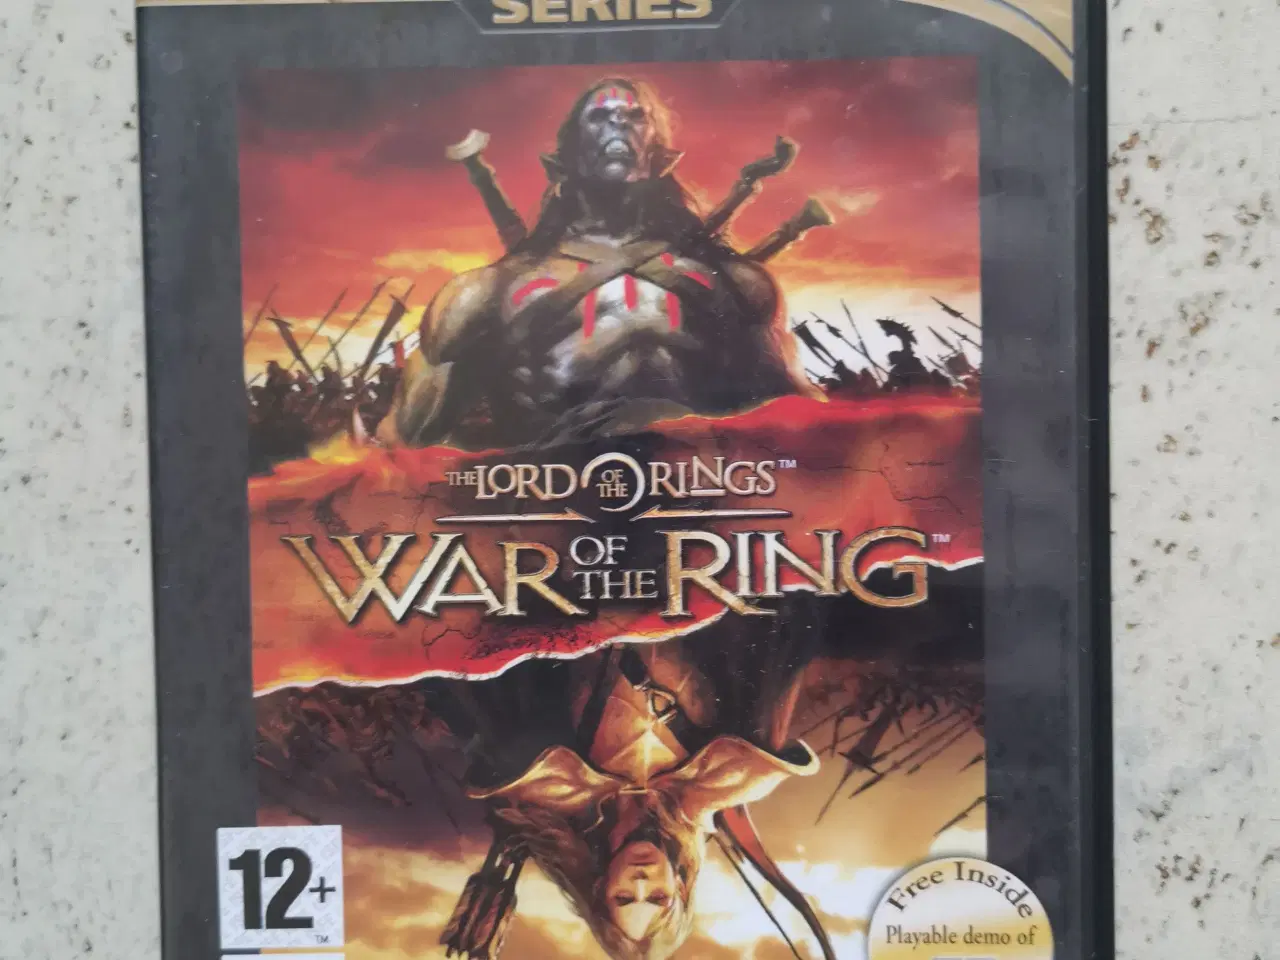 Billede 1 - The Lord of the Rings War of The Ring Sierra